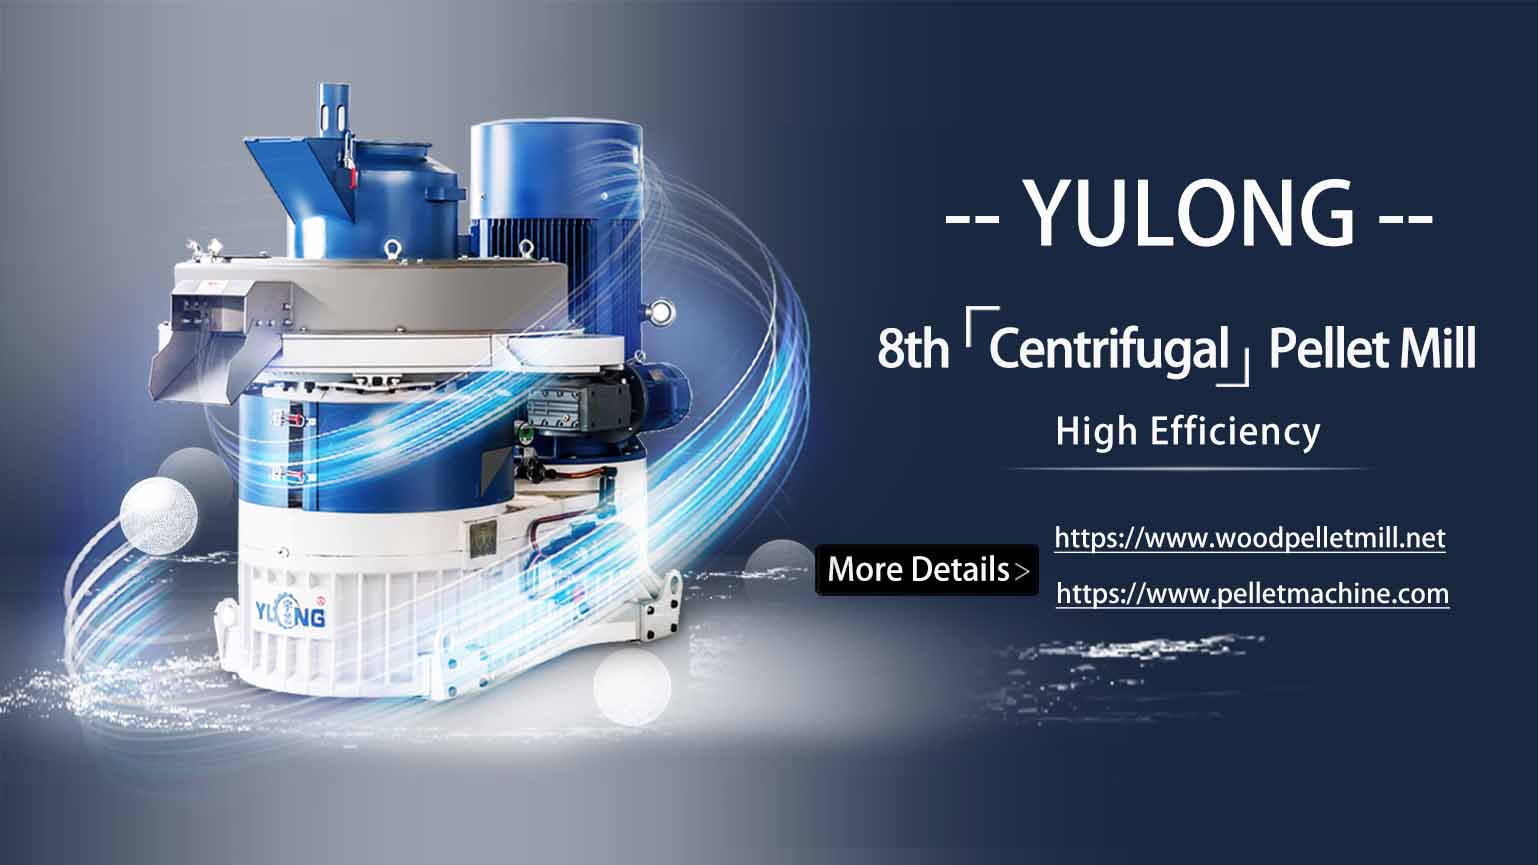 Why Do Customers Choose YULONG Biomass Pellet Mill? -This video tells you why YULONG Pellet Mill is of High Quality!!